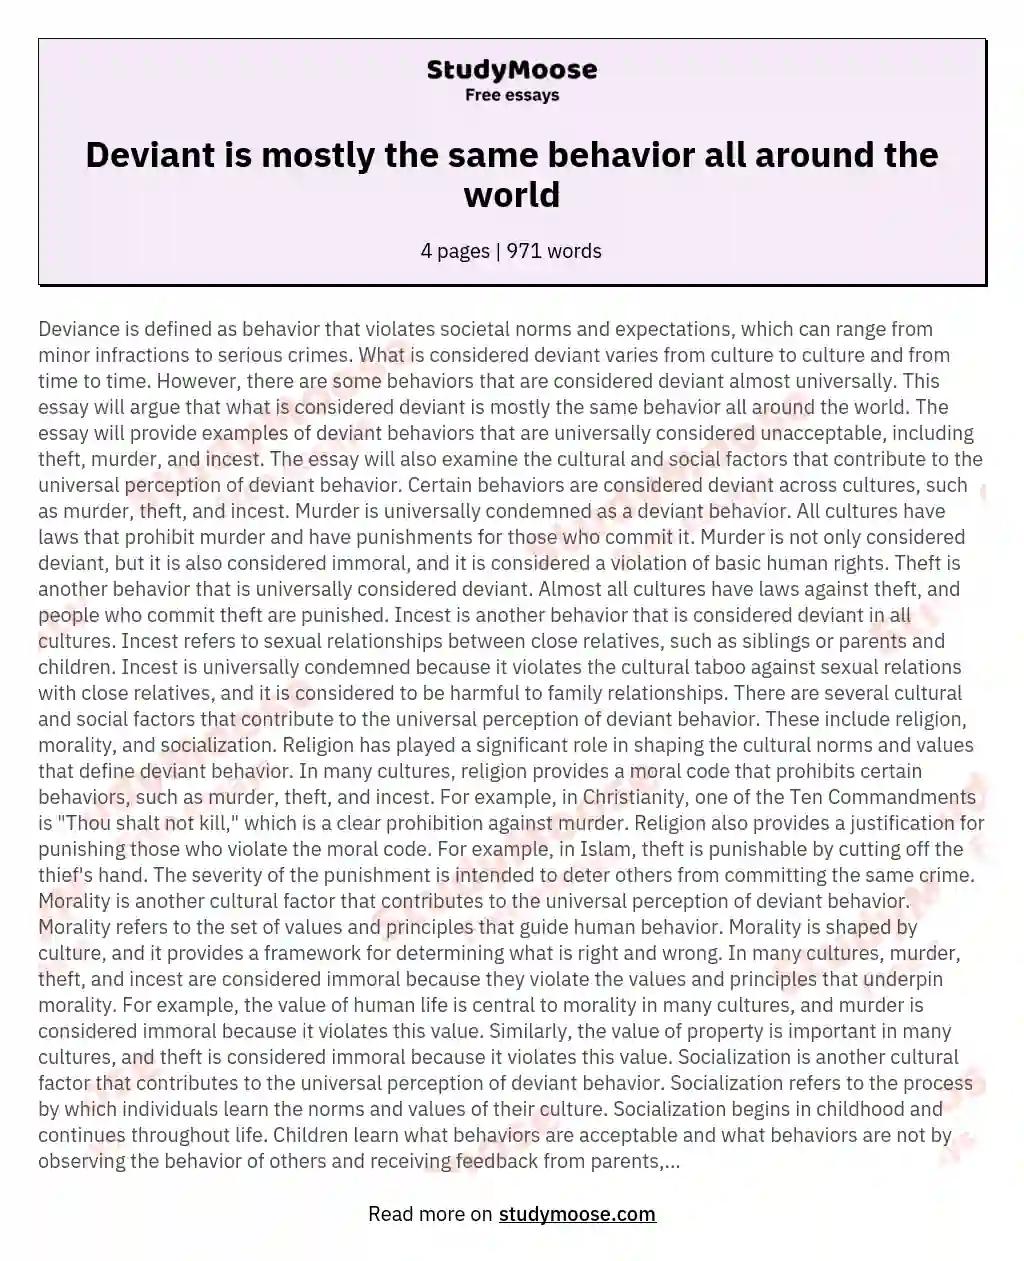 Deviant is mostly the same behavior all around the world essay